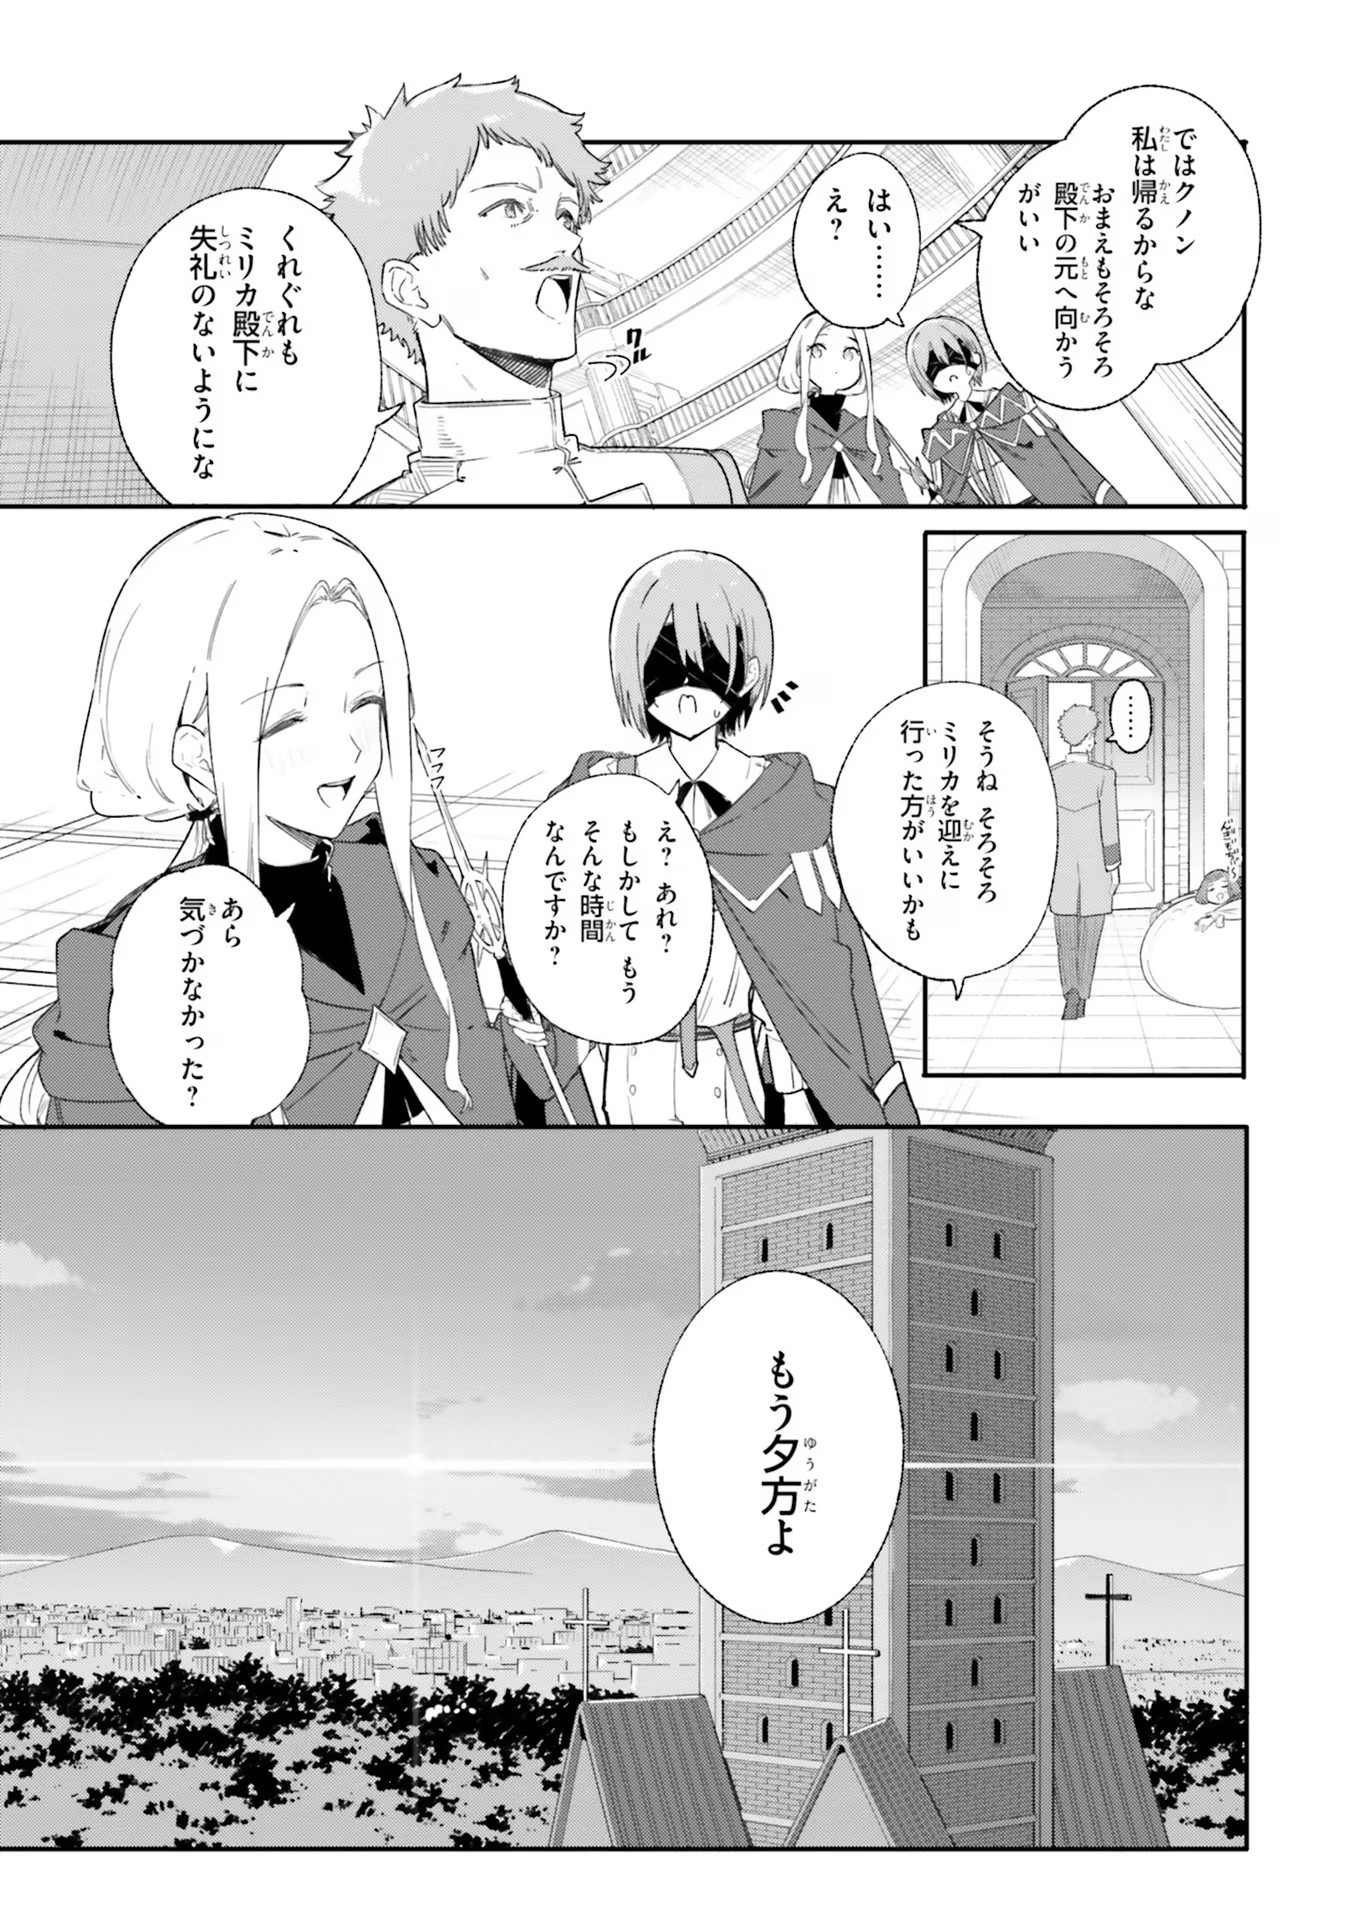 Kunon the Sorcerer Can See Kunon the Sorcerer Can See Through 魔術師クノンは見えている 第9話 - Page 7